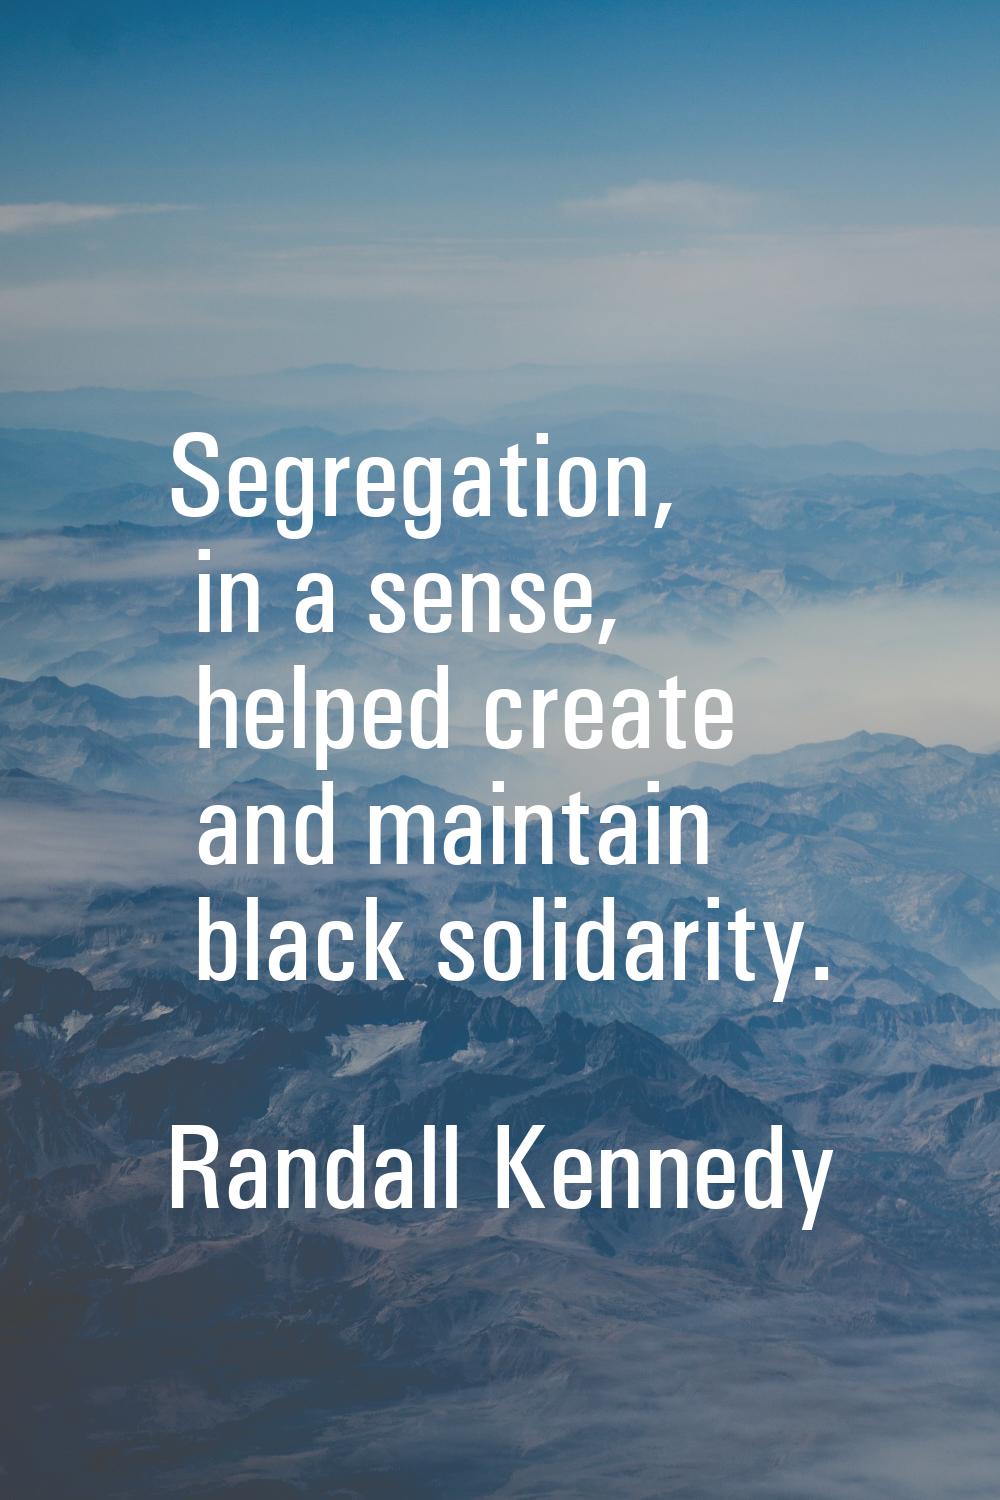 Segregation, in a sense, helped create and maintain black solidarity.